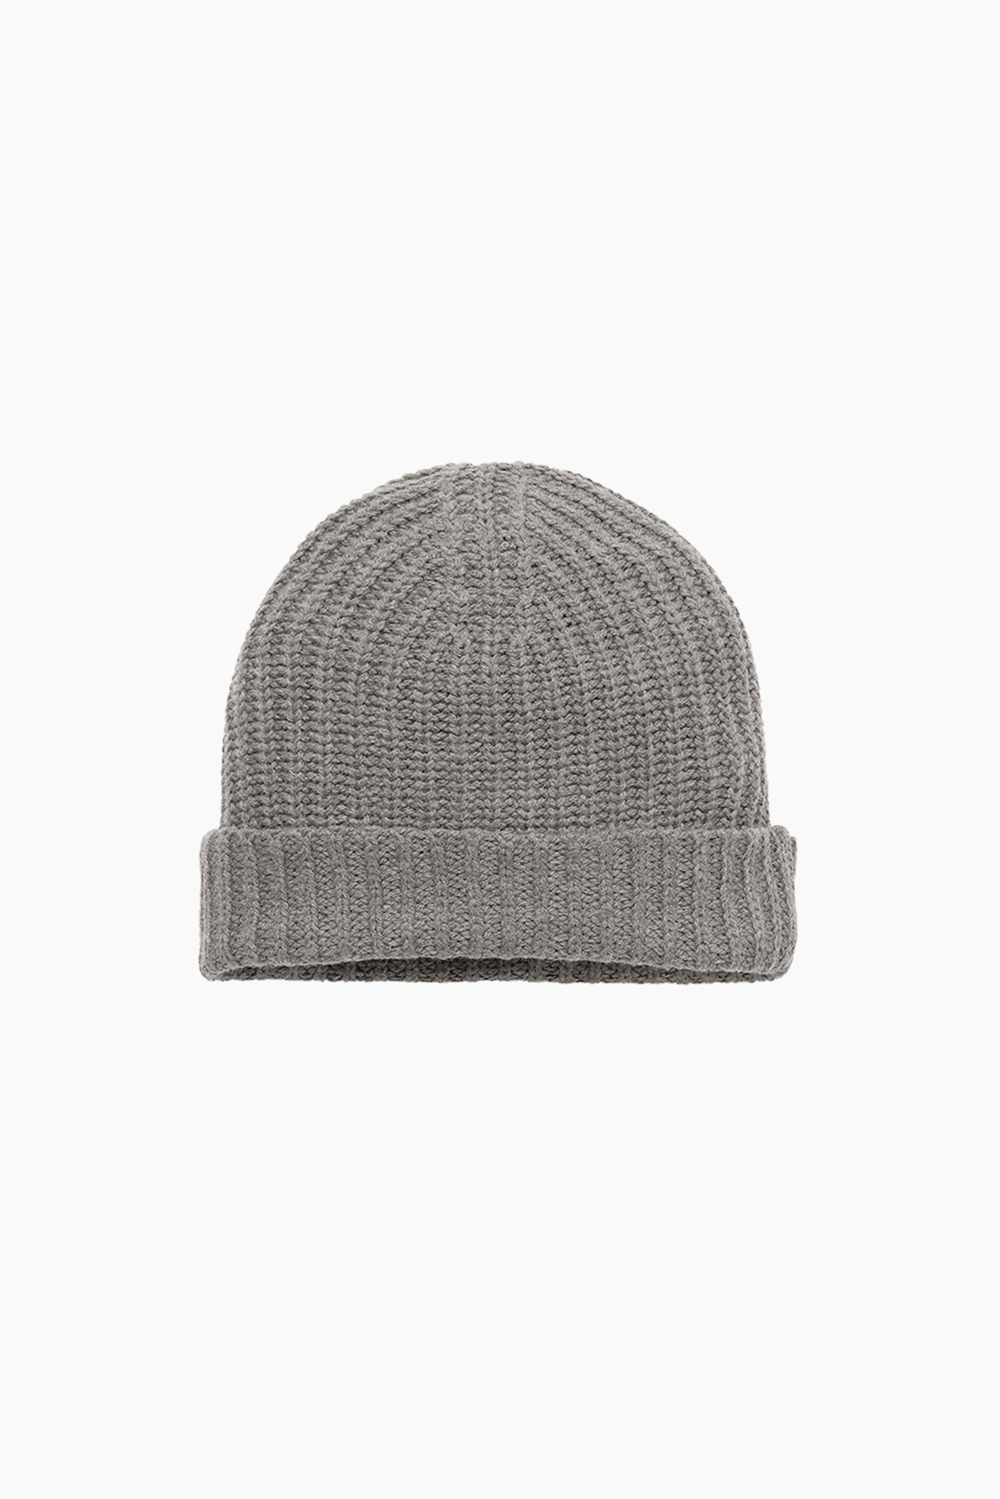 CHUNKY RIB KNIT CLASSIC KNIT BEANIE - MARBLE Featured Image